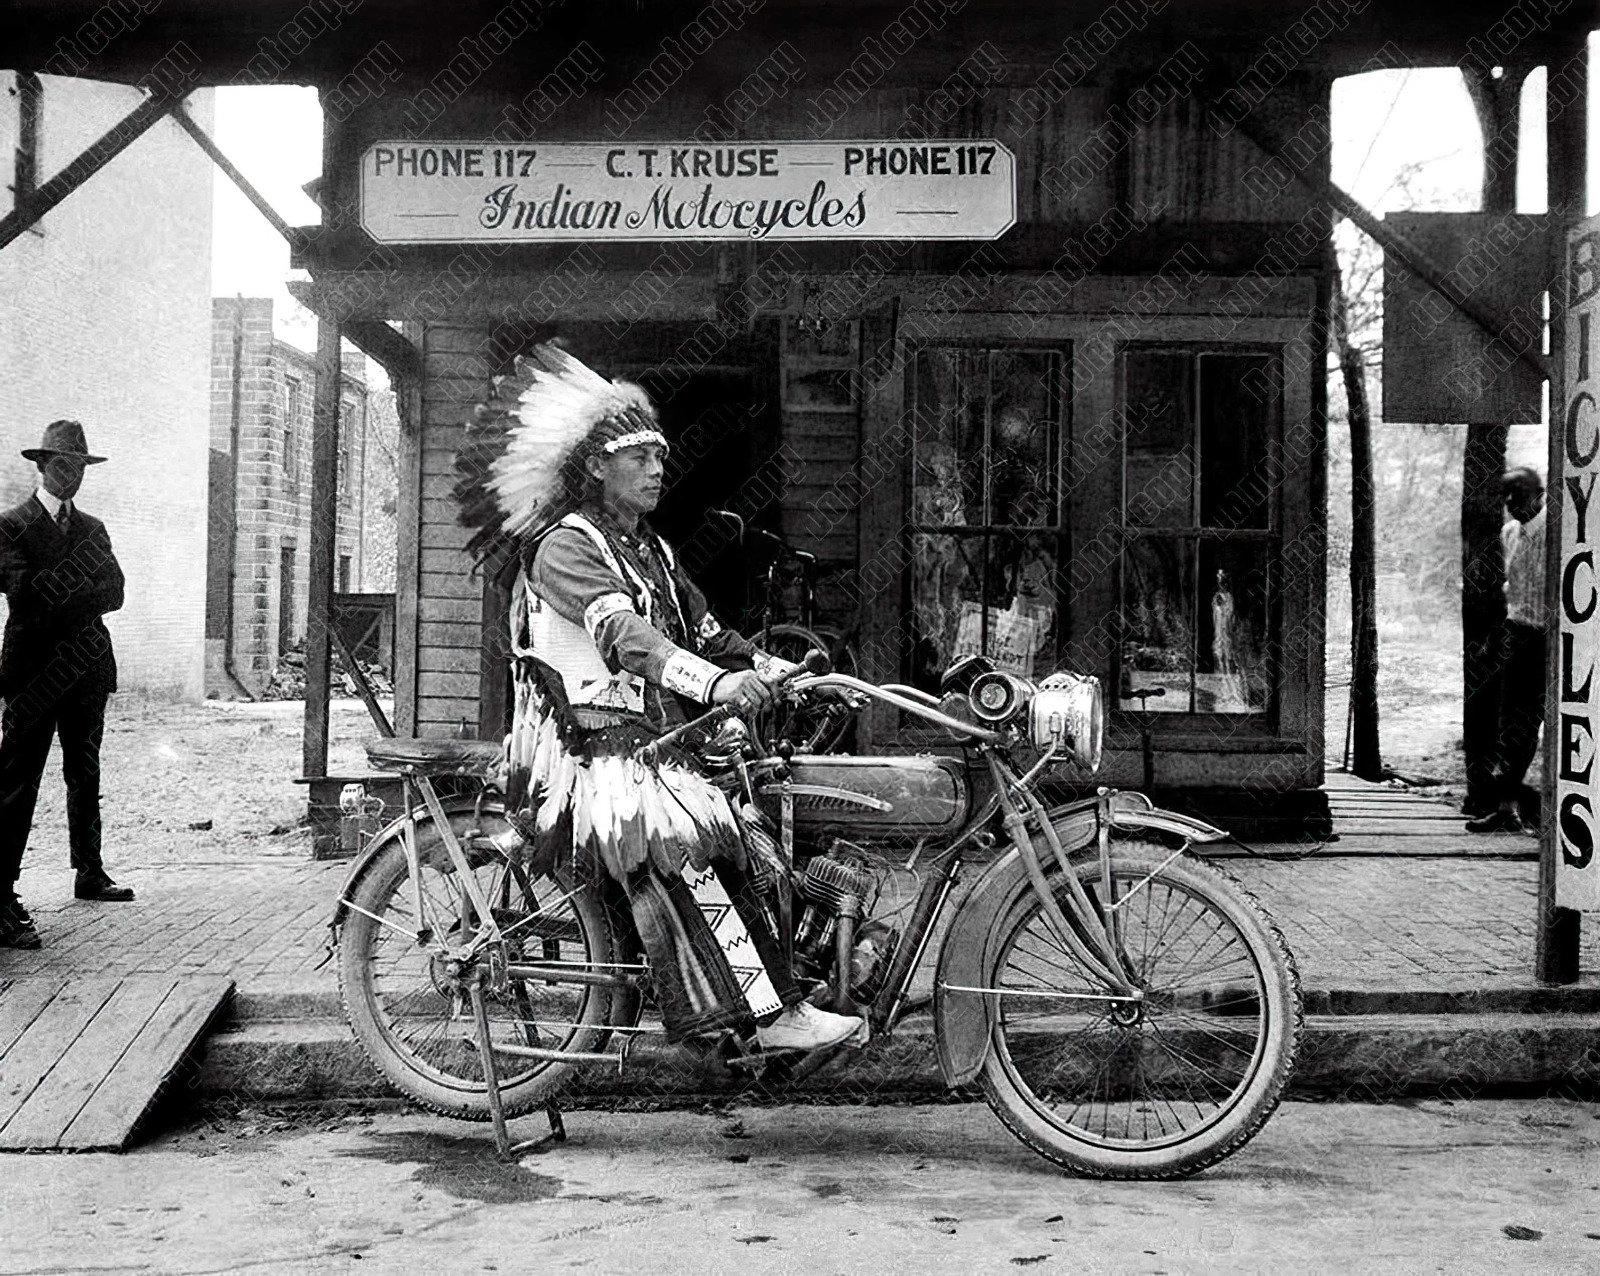 INDIAN MOTORCYCLE PHOTO ORIGINAL 1920S NATIVE INDIAN CHIEF 8.5X11 POSTER REPRINT